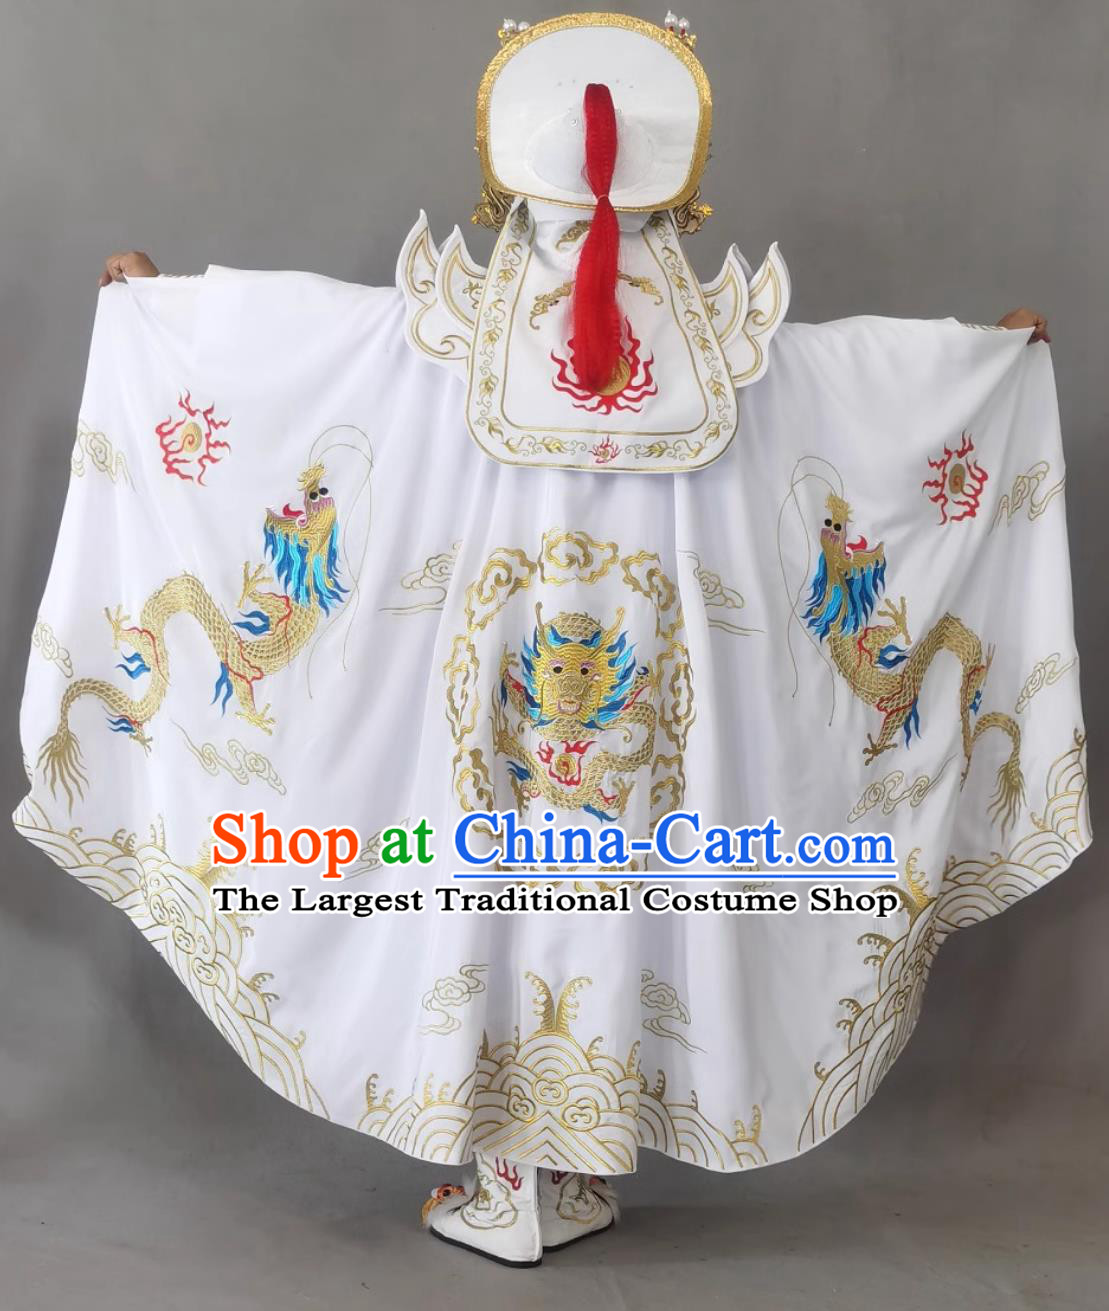 China Stage Magic Performance Bian Lian Embroidery Costume Sichuan Opera Face Changing White Clothing Complete Set